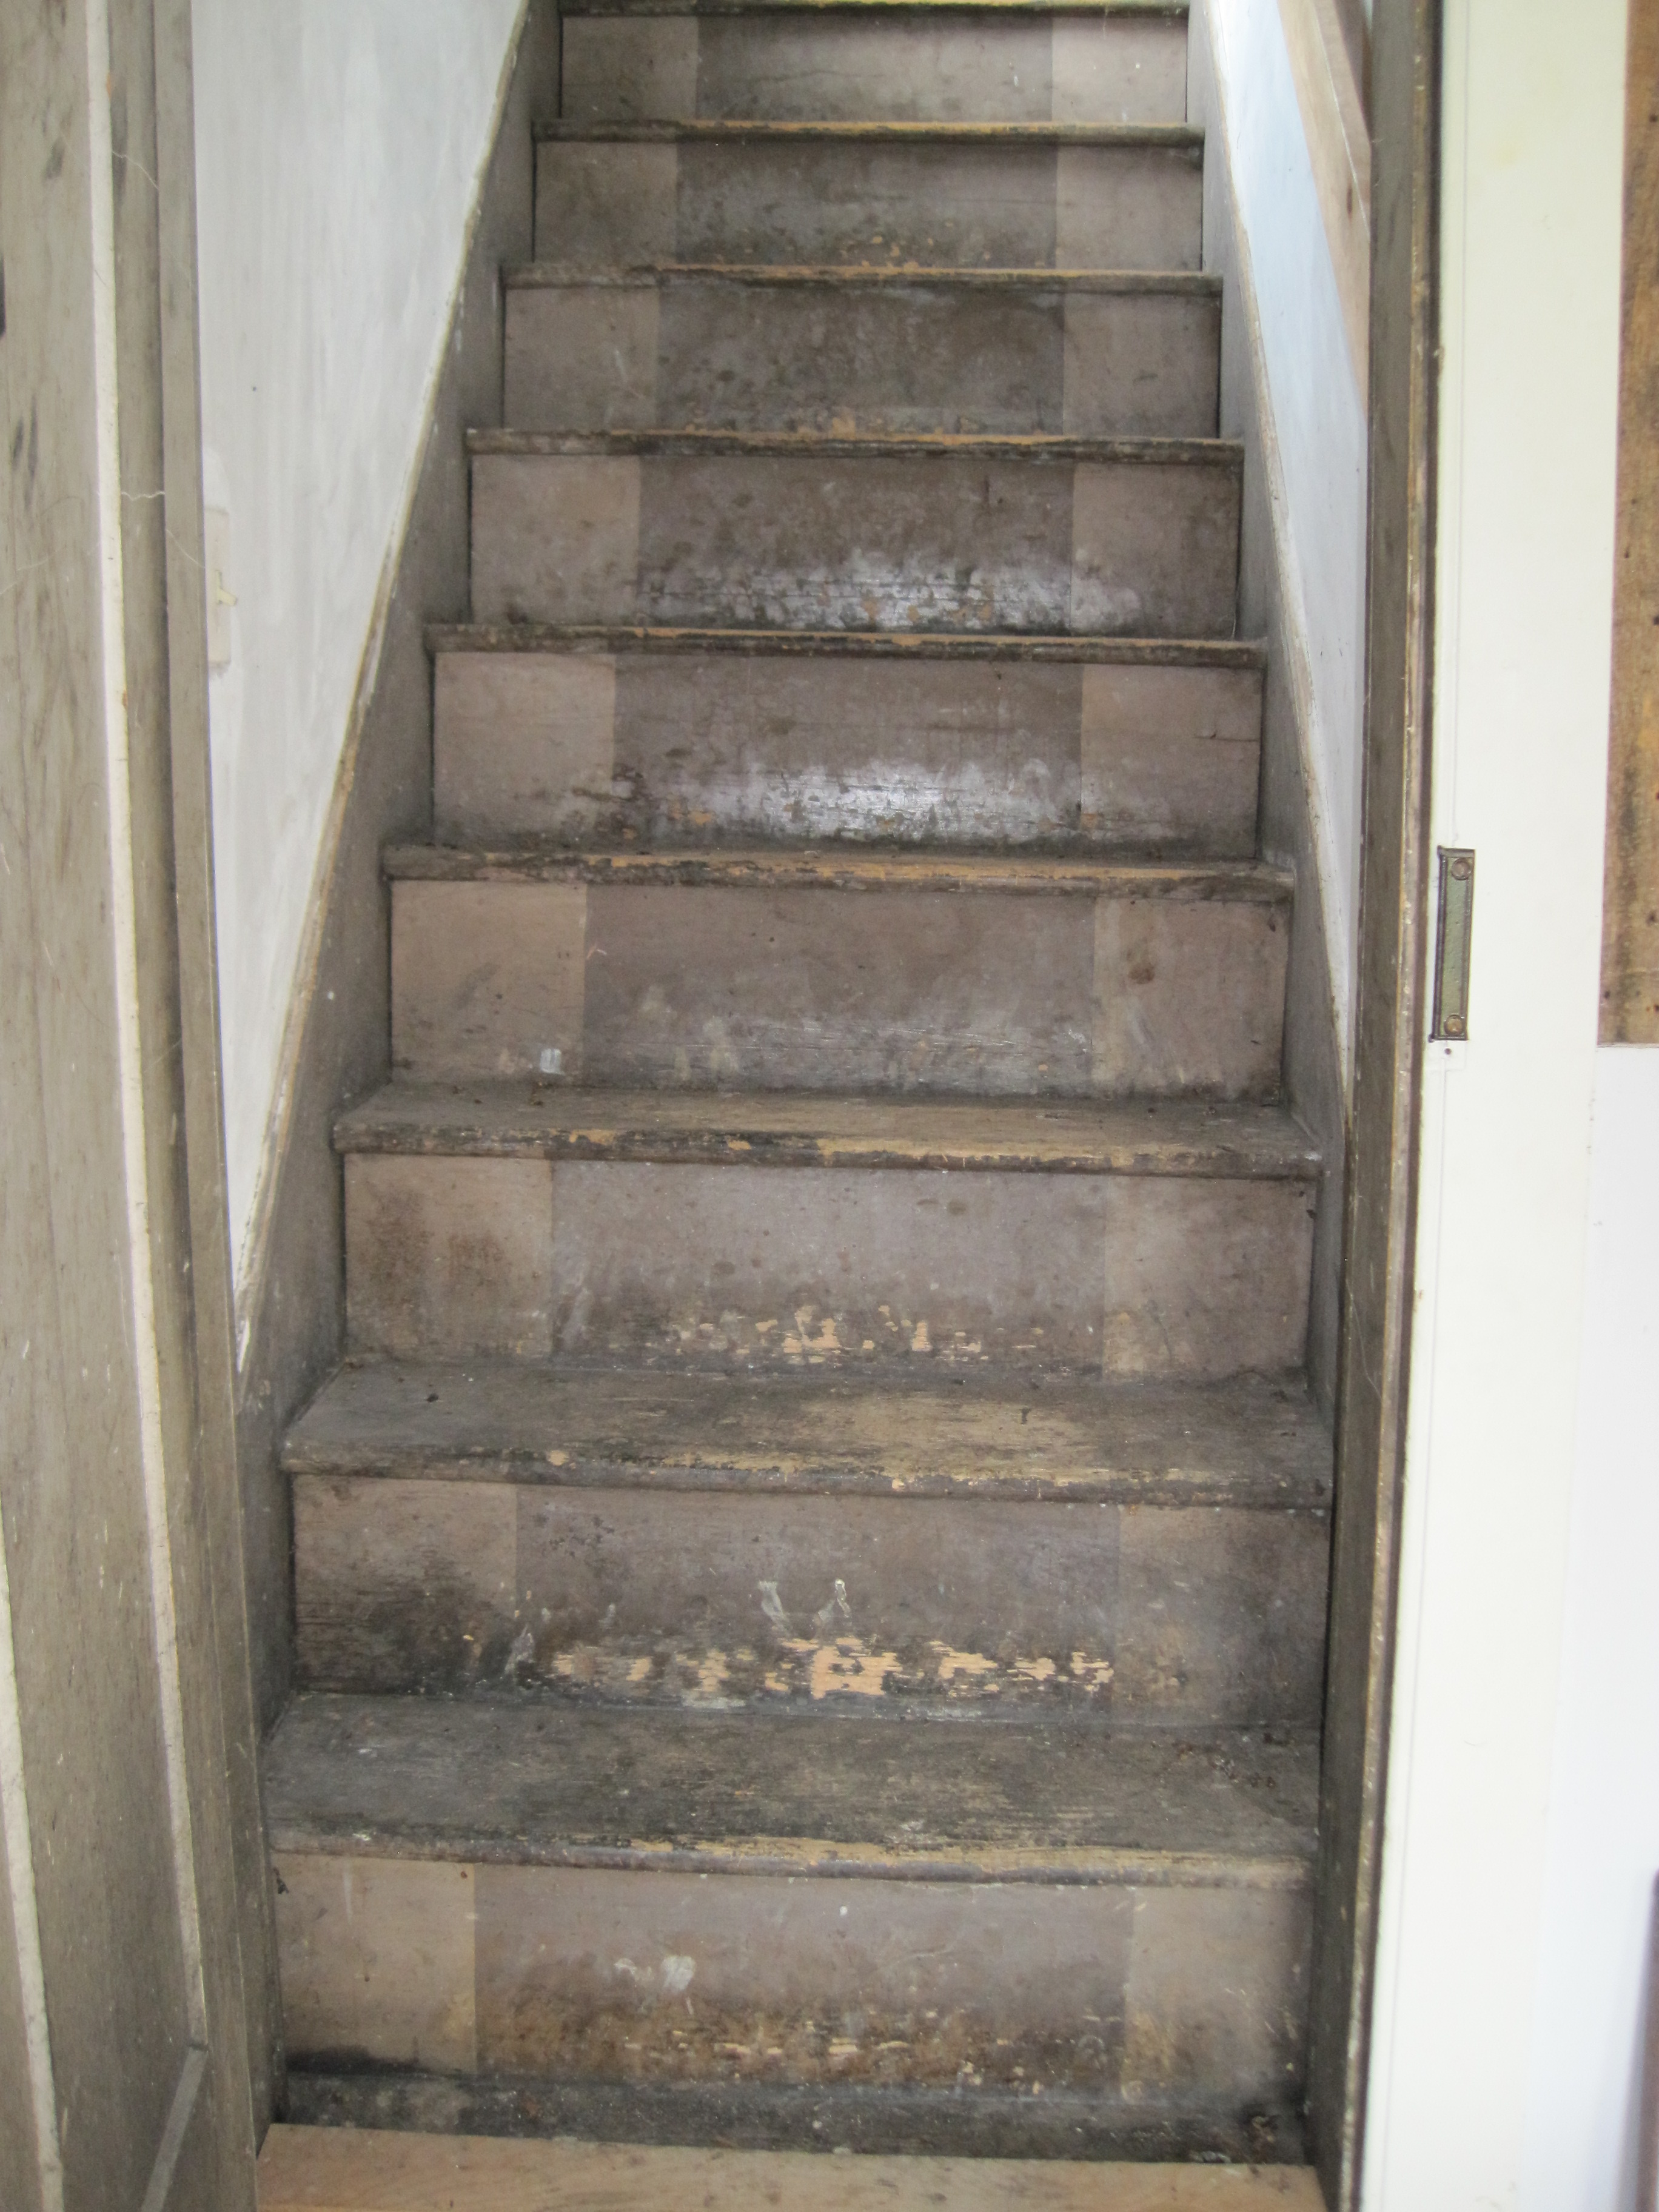 Original stairs leading from the Double Parlor to the second floor bedrooms